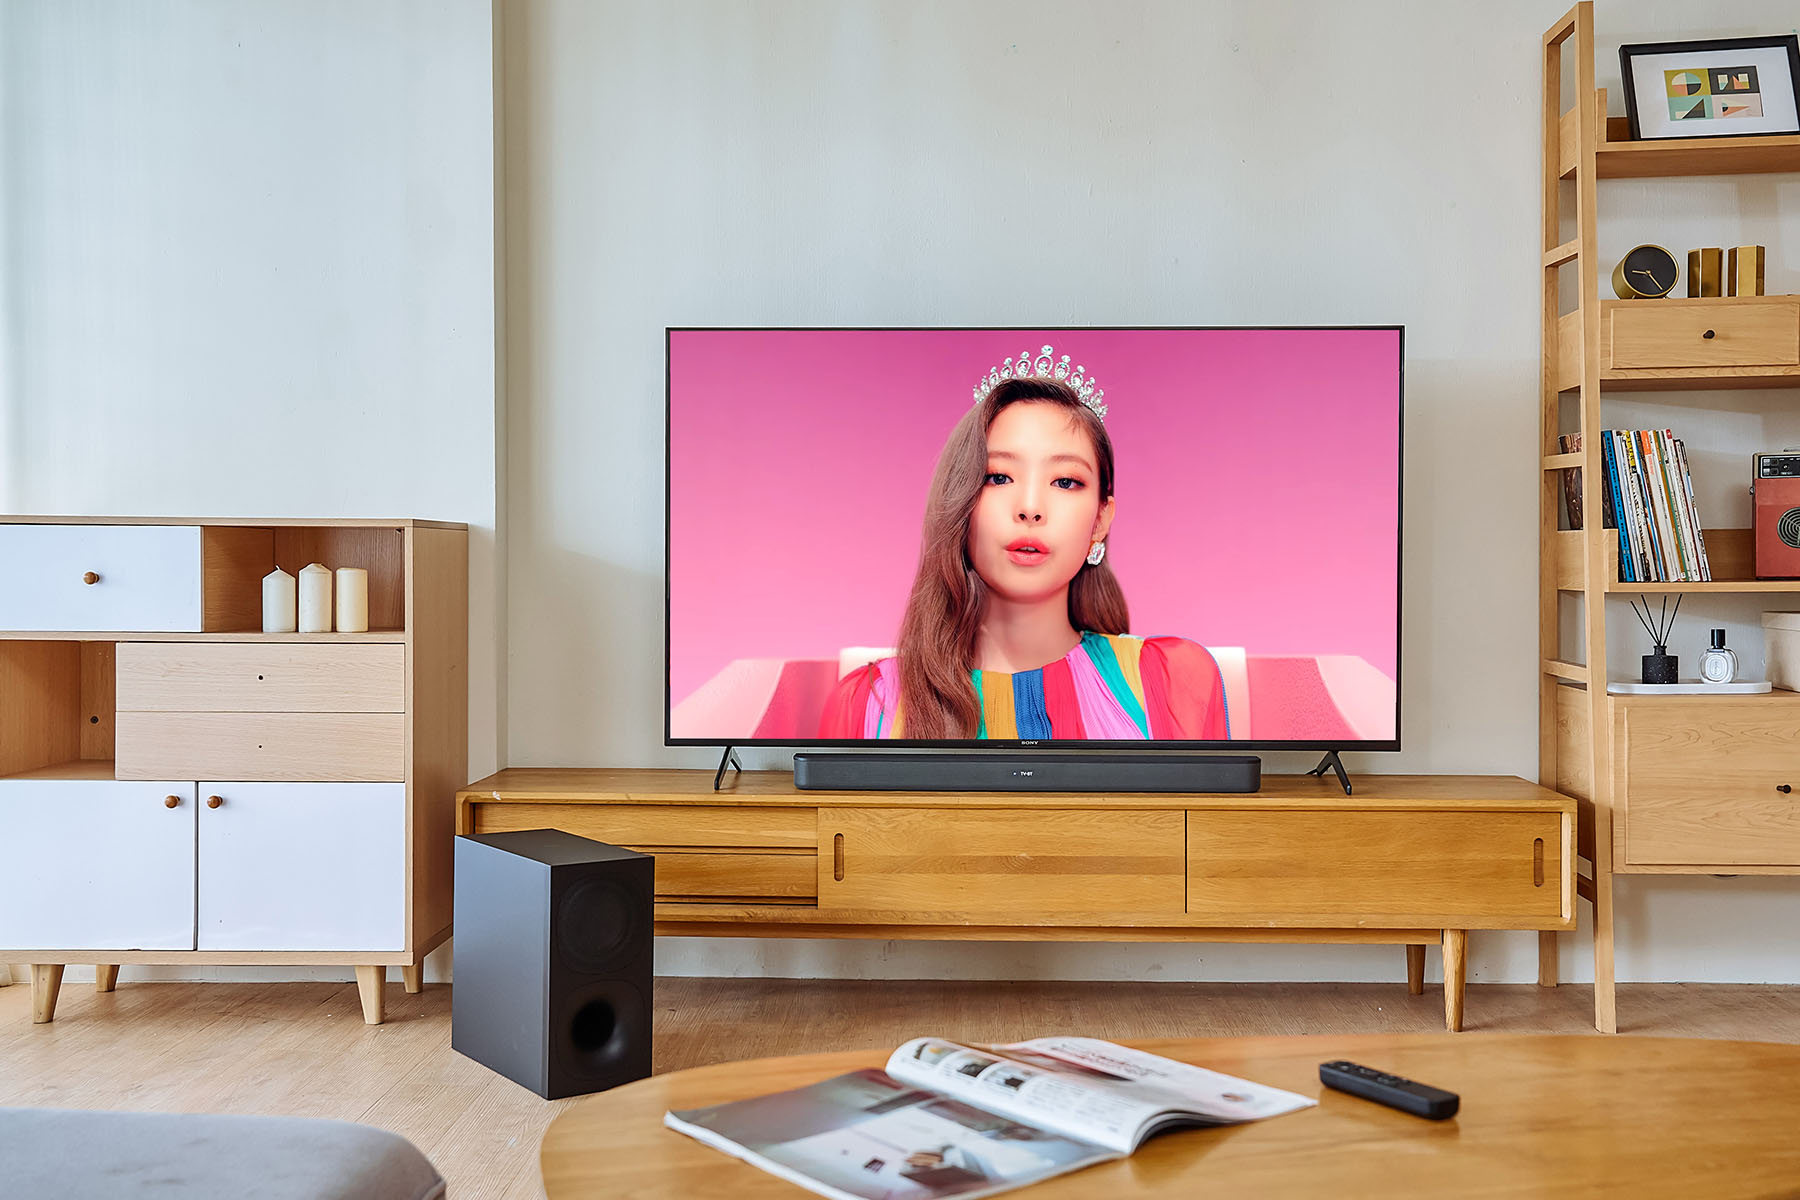 The epidemic situation in Taiwan has been rapidly heating up recently. Staying at home to enjoy audio-visual programs is one of the safety and epidemic prevention measures. Through theater-level surround sound, the movie-watching experience can be further enhanced.